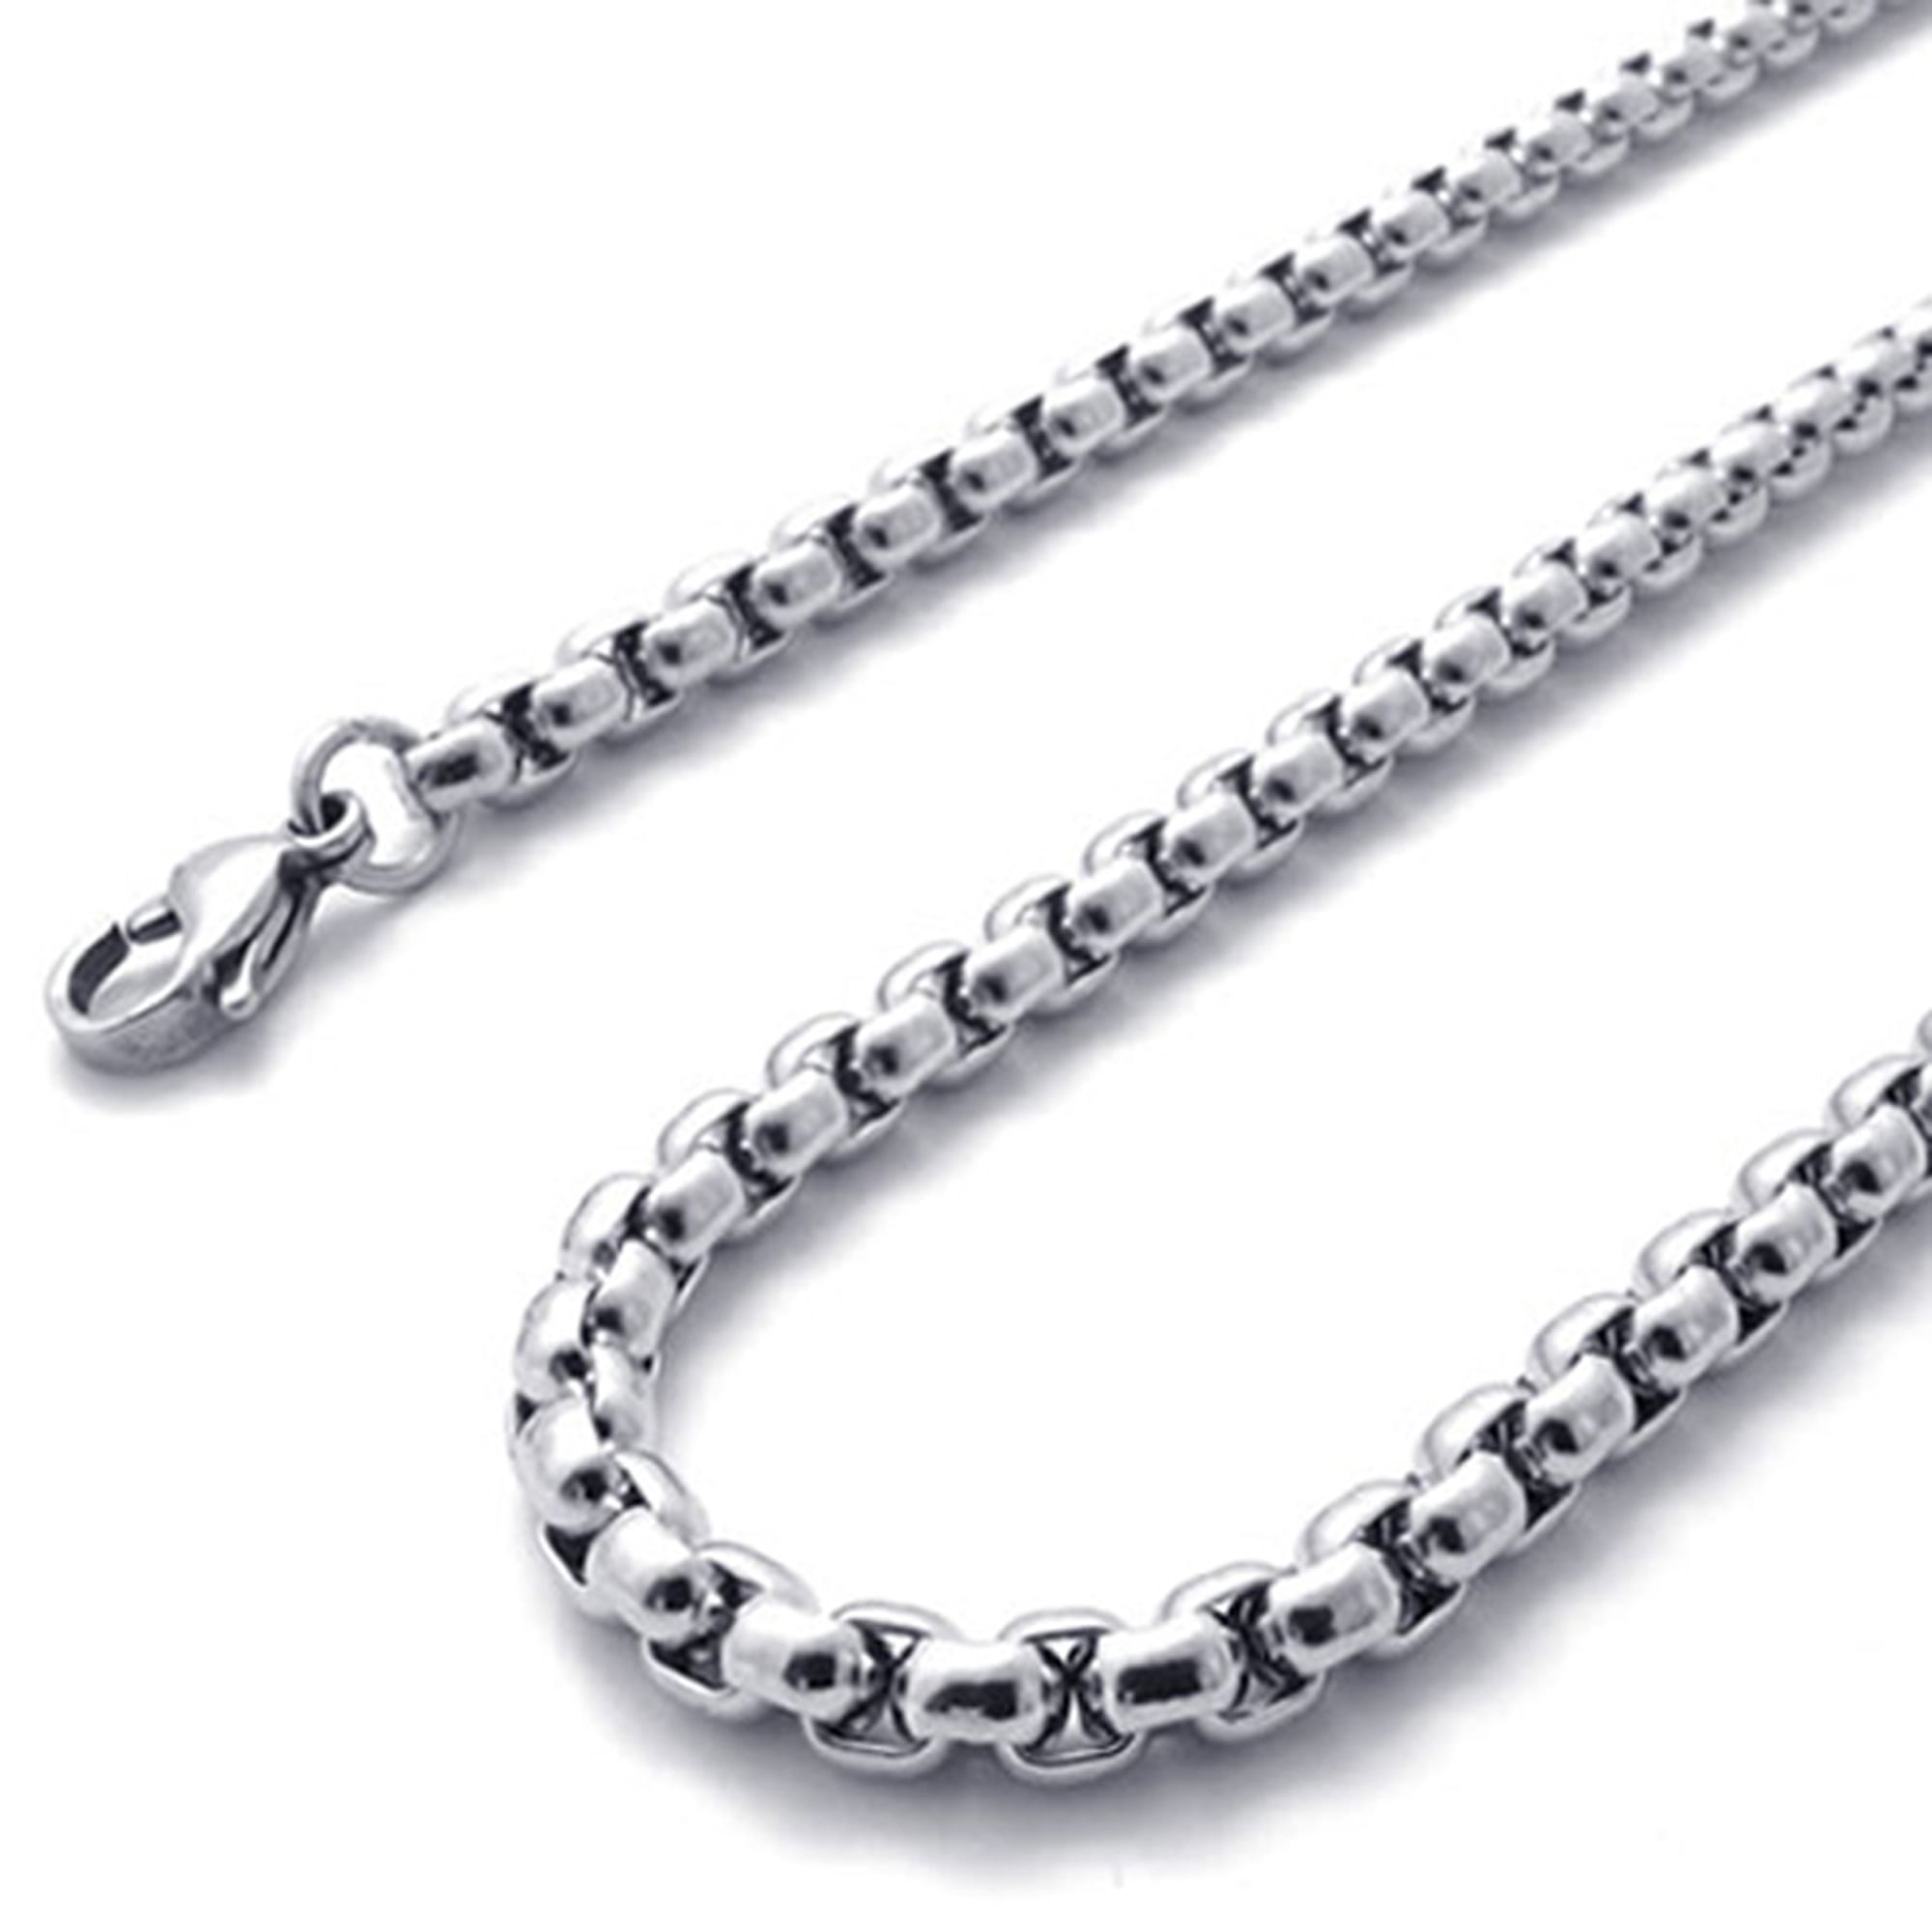 26 INCH SILVER STAINLESS STEEL 4MM ROLO  LINK ROPE CHAIN NECKLACE 